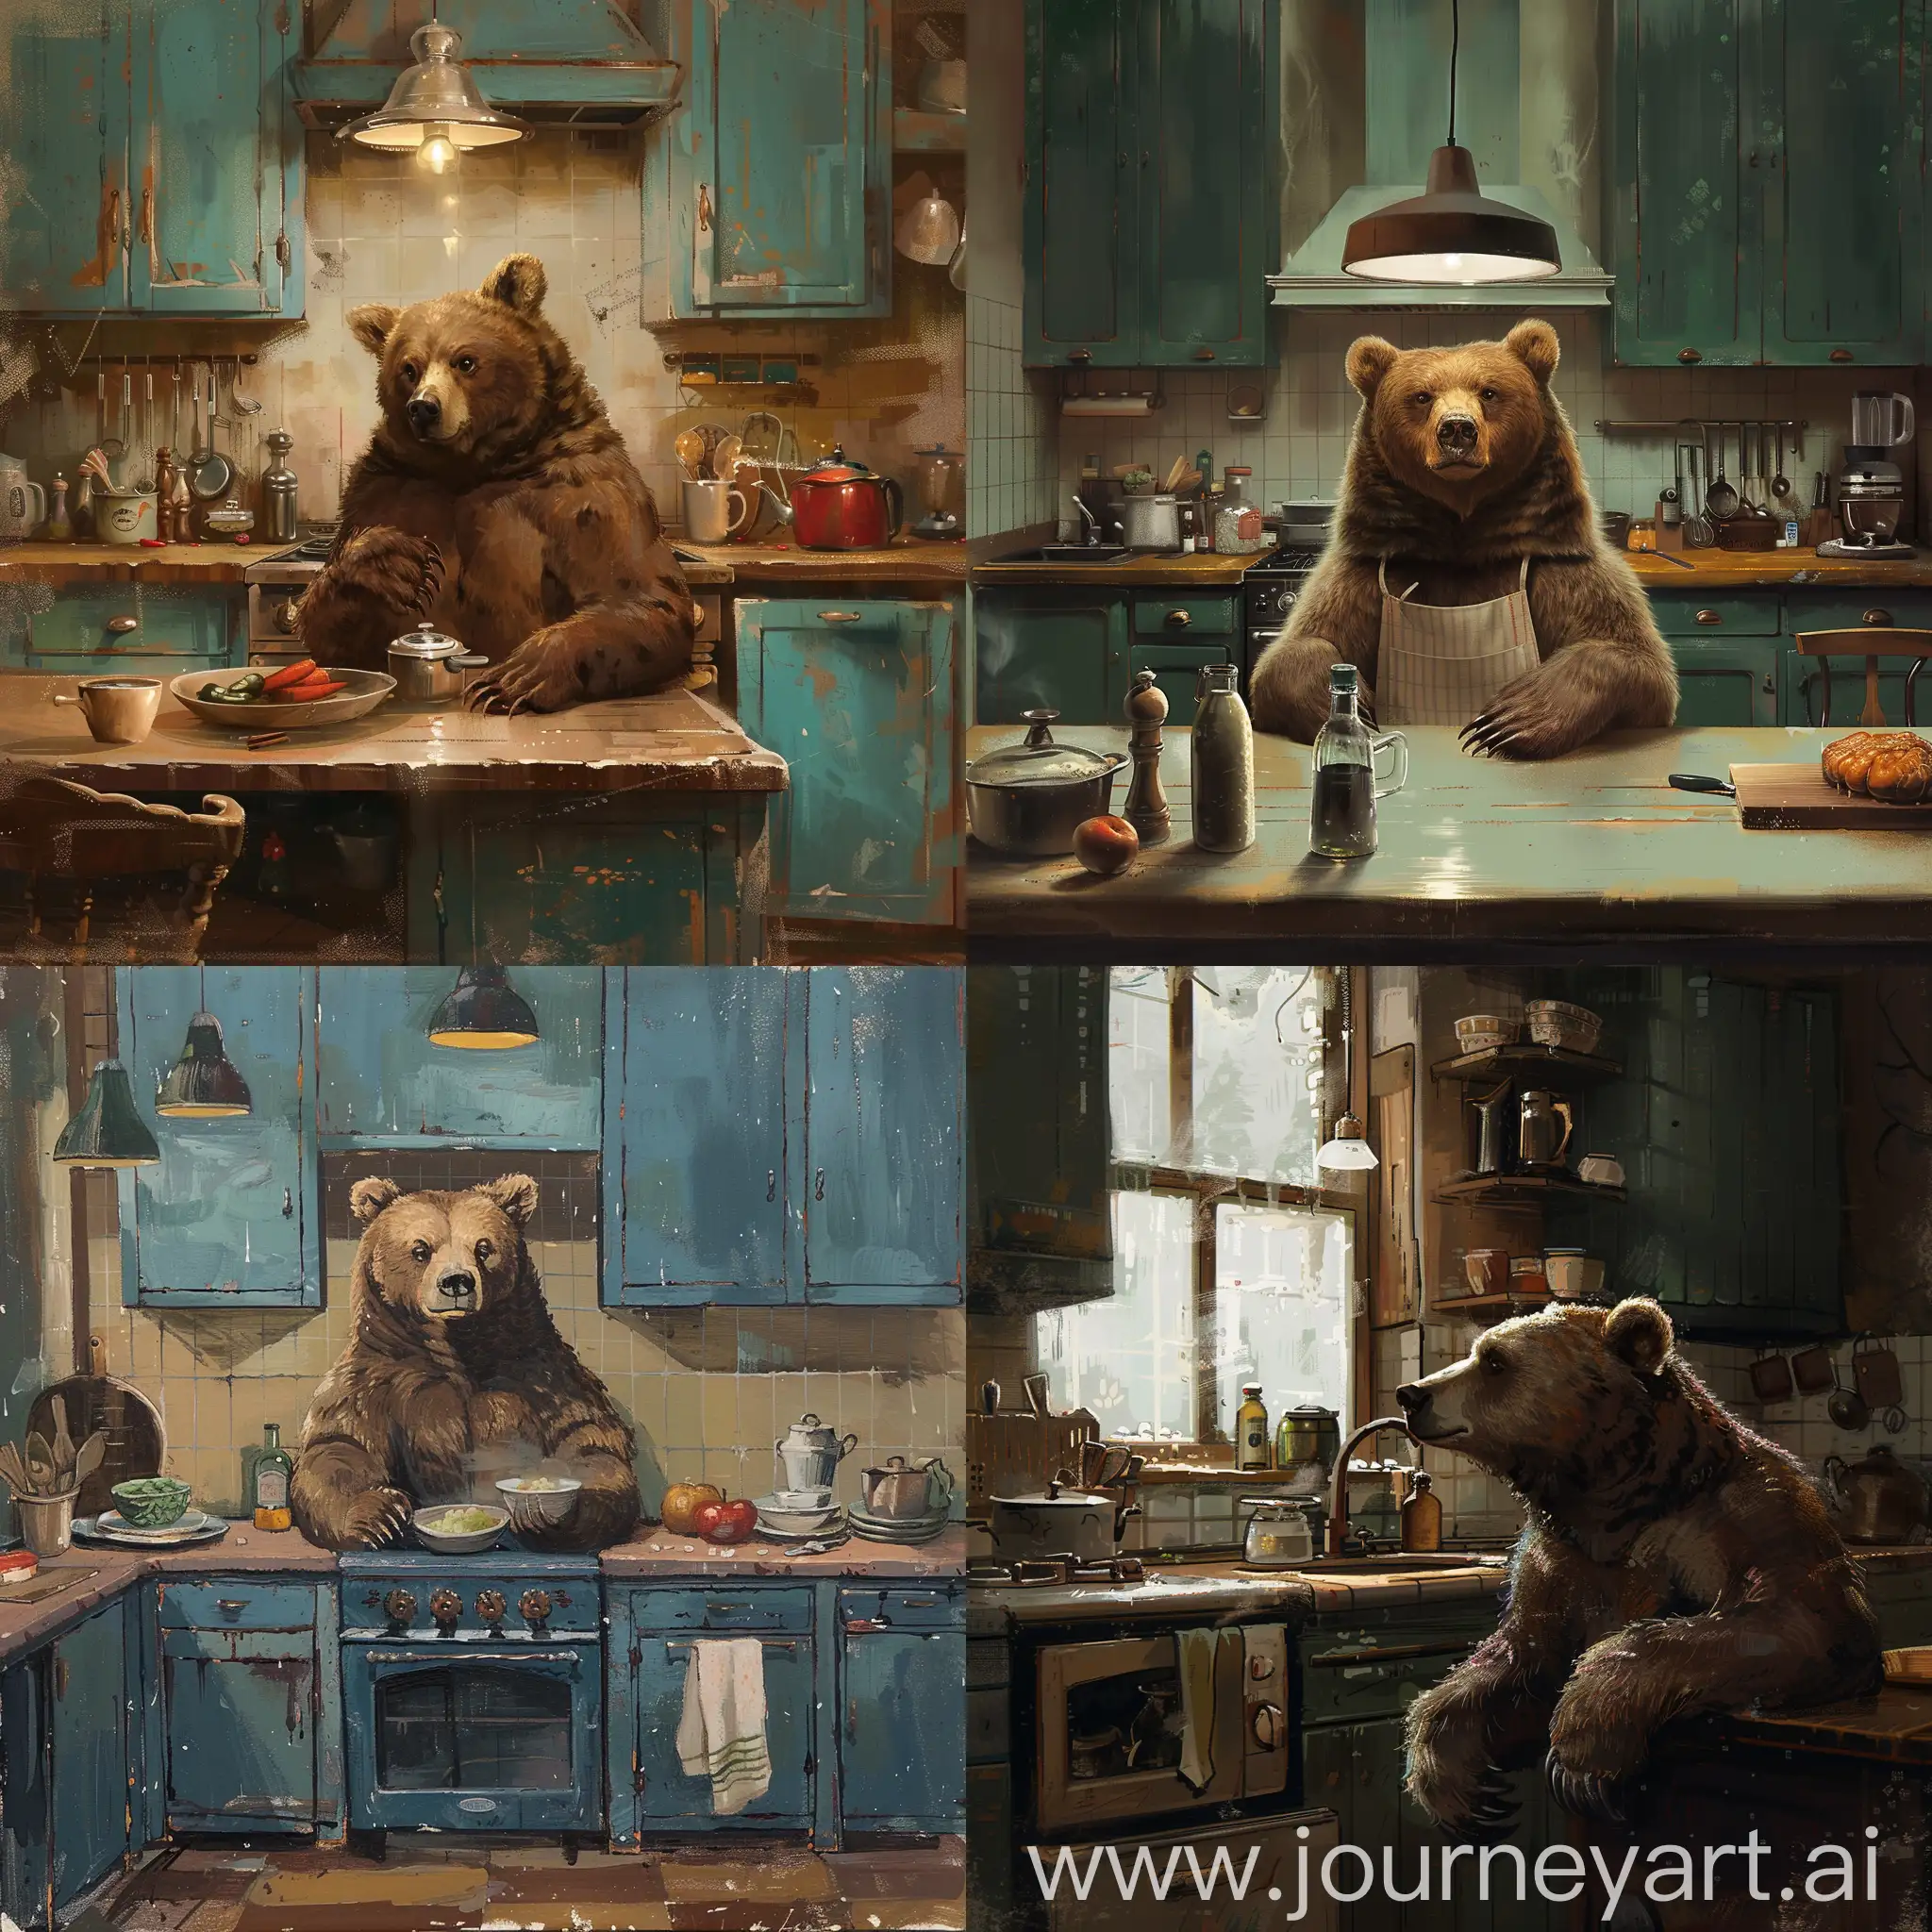 Playful-Bear-in-a-Kitchen-Setting